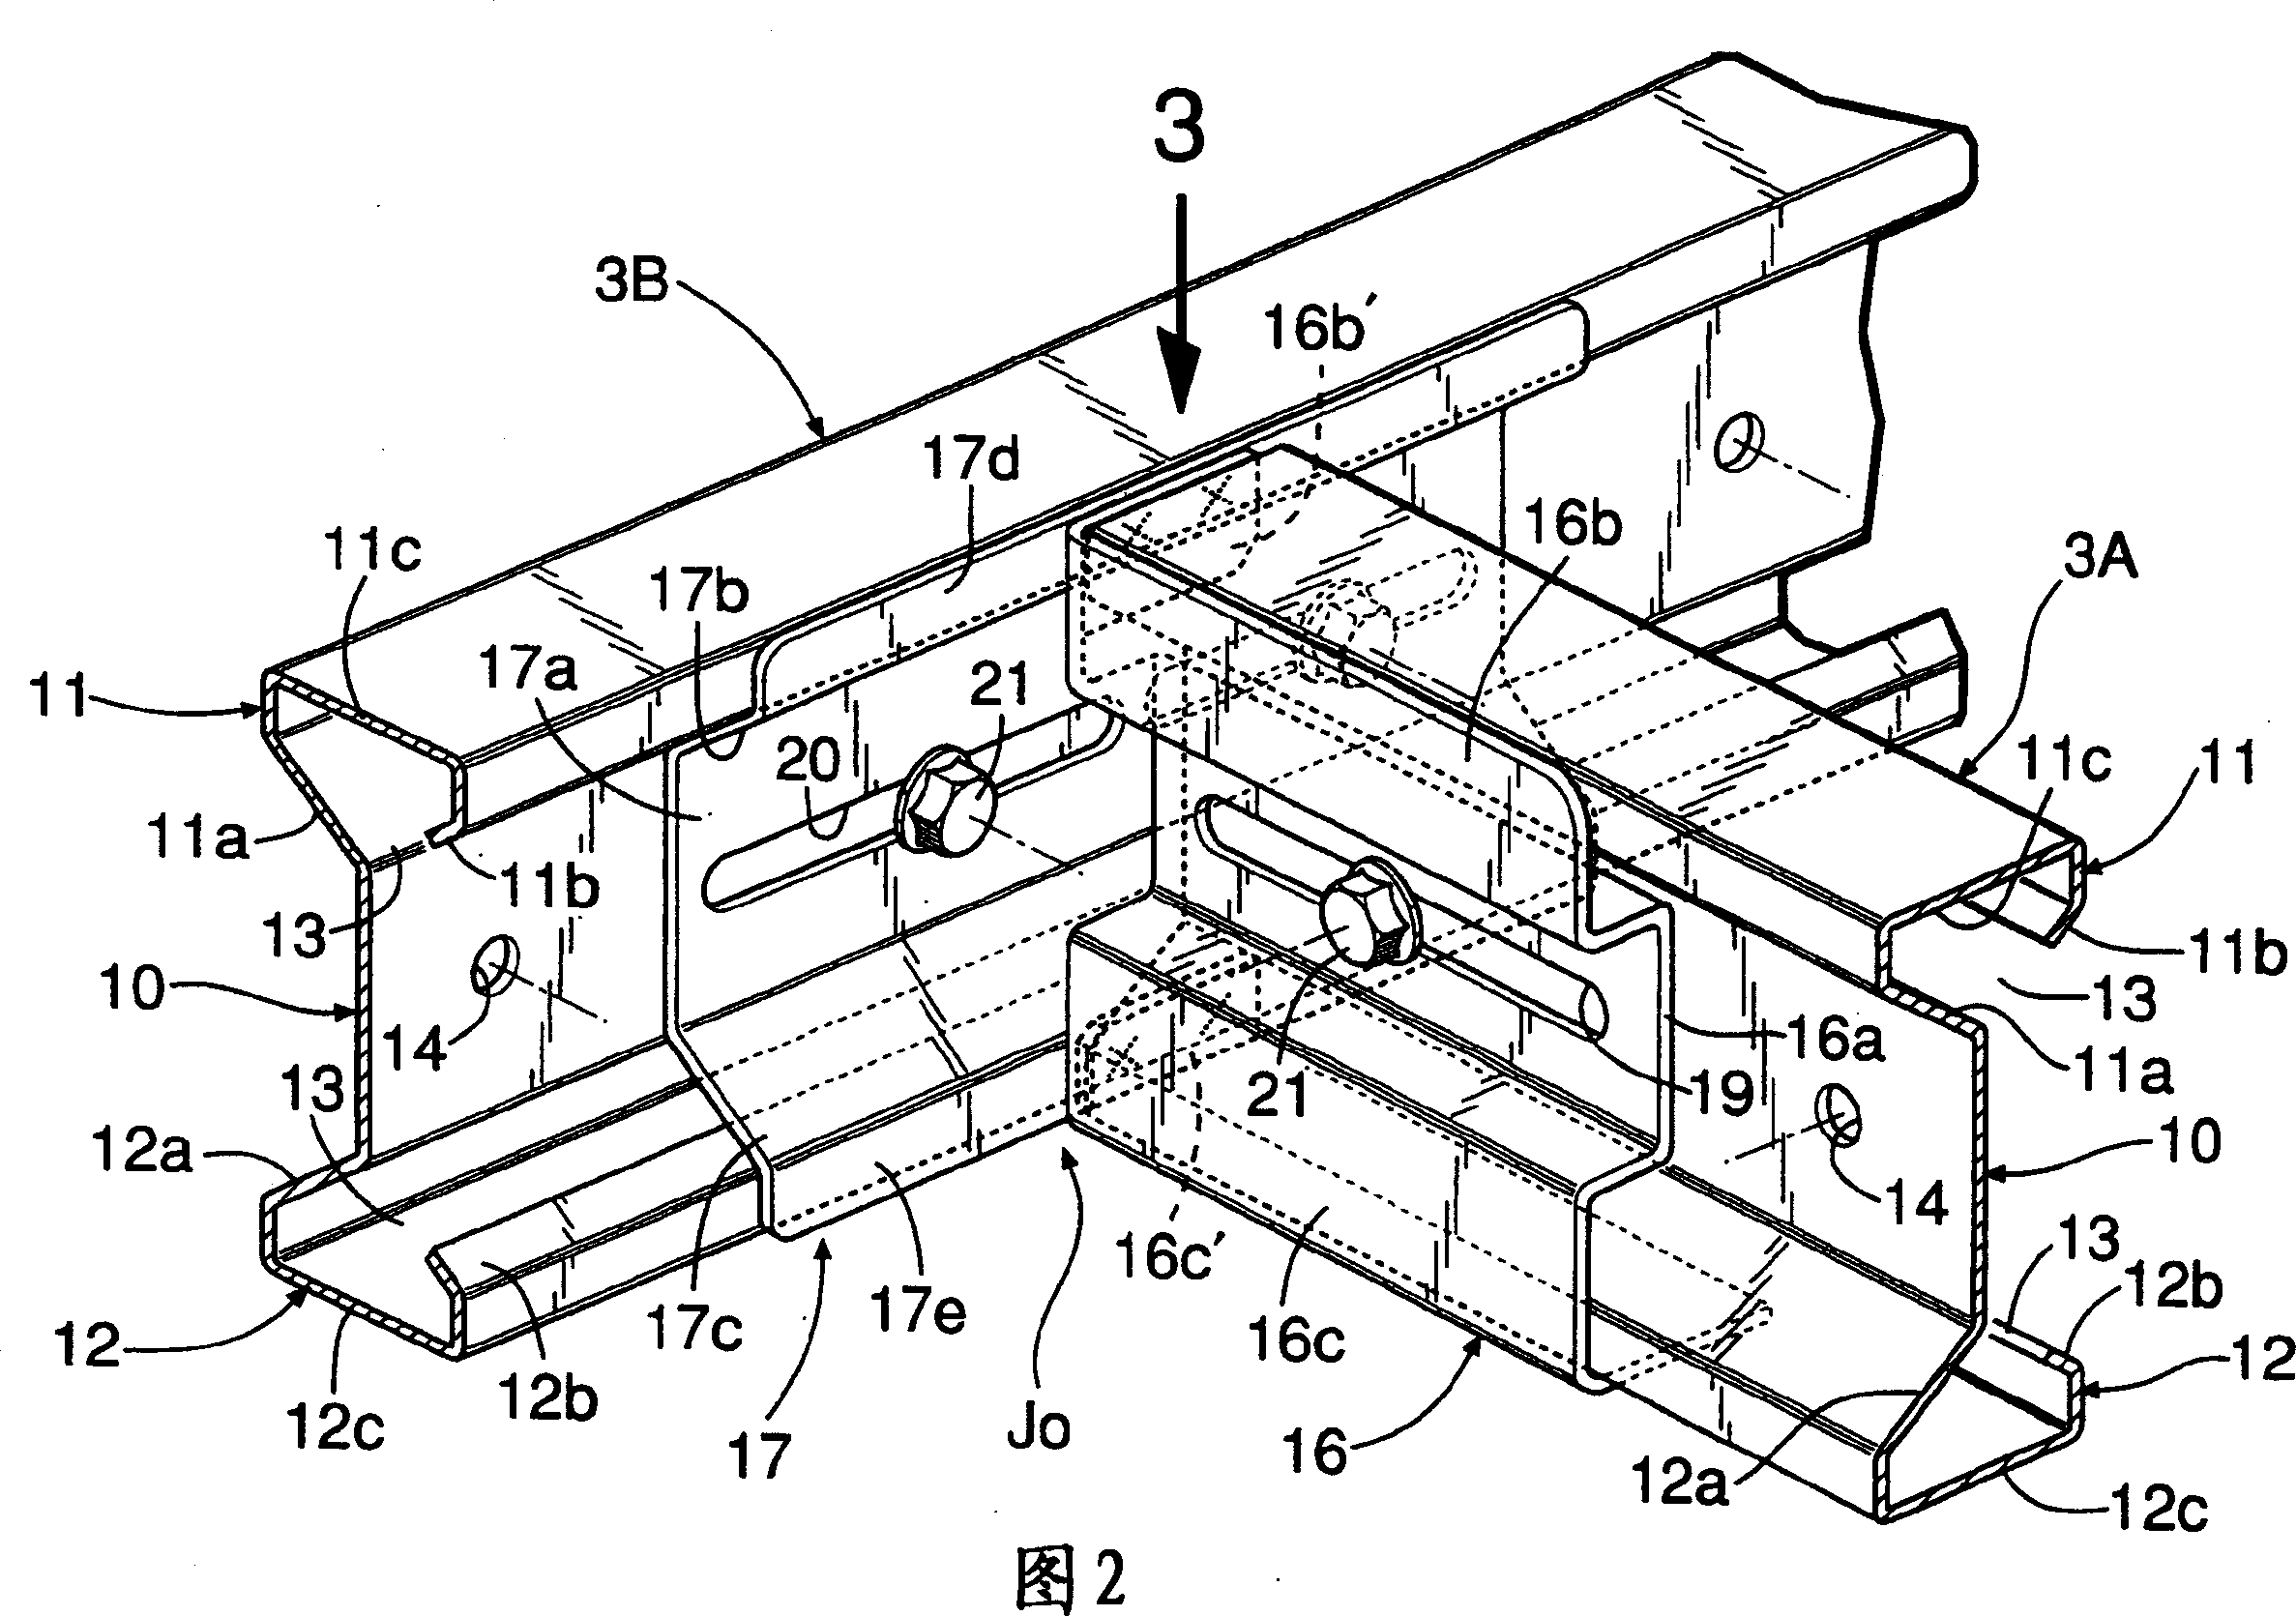 Beam connecting structure in house